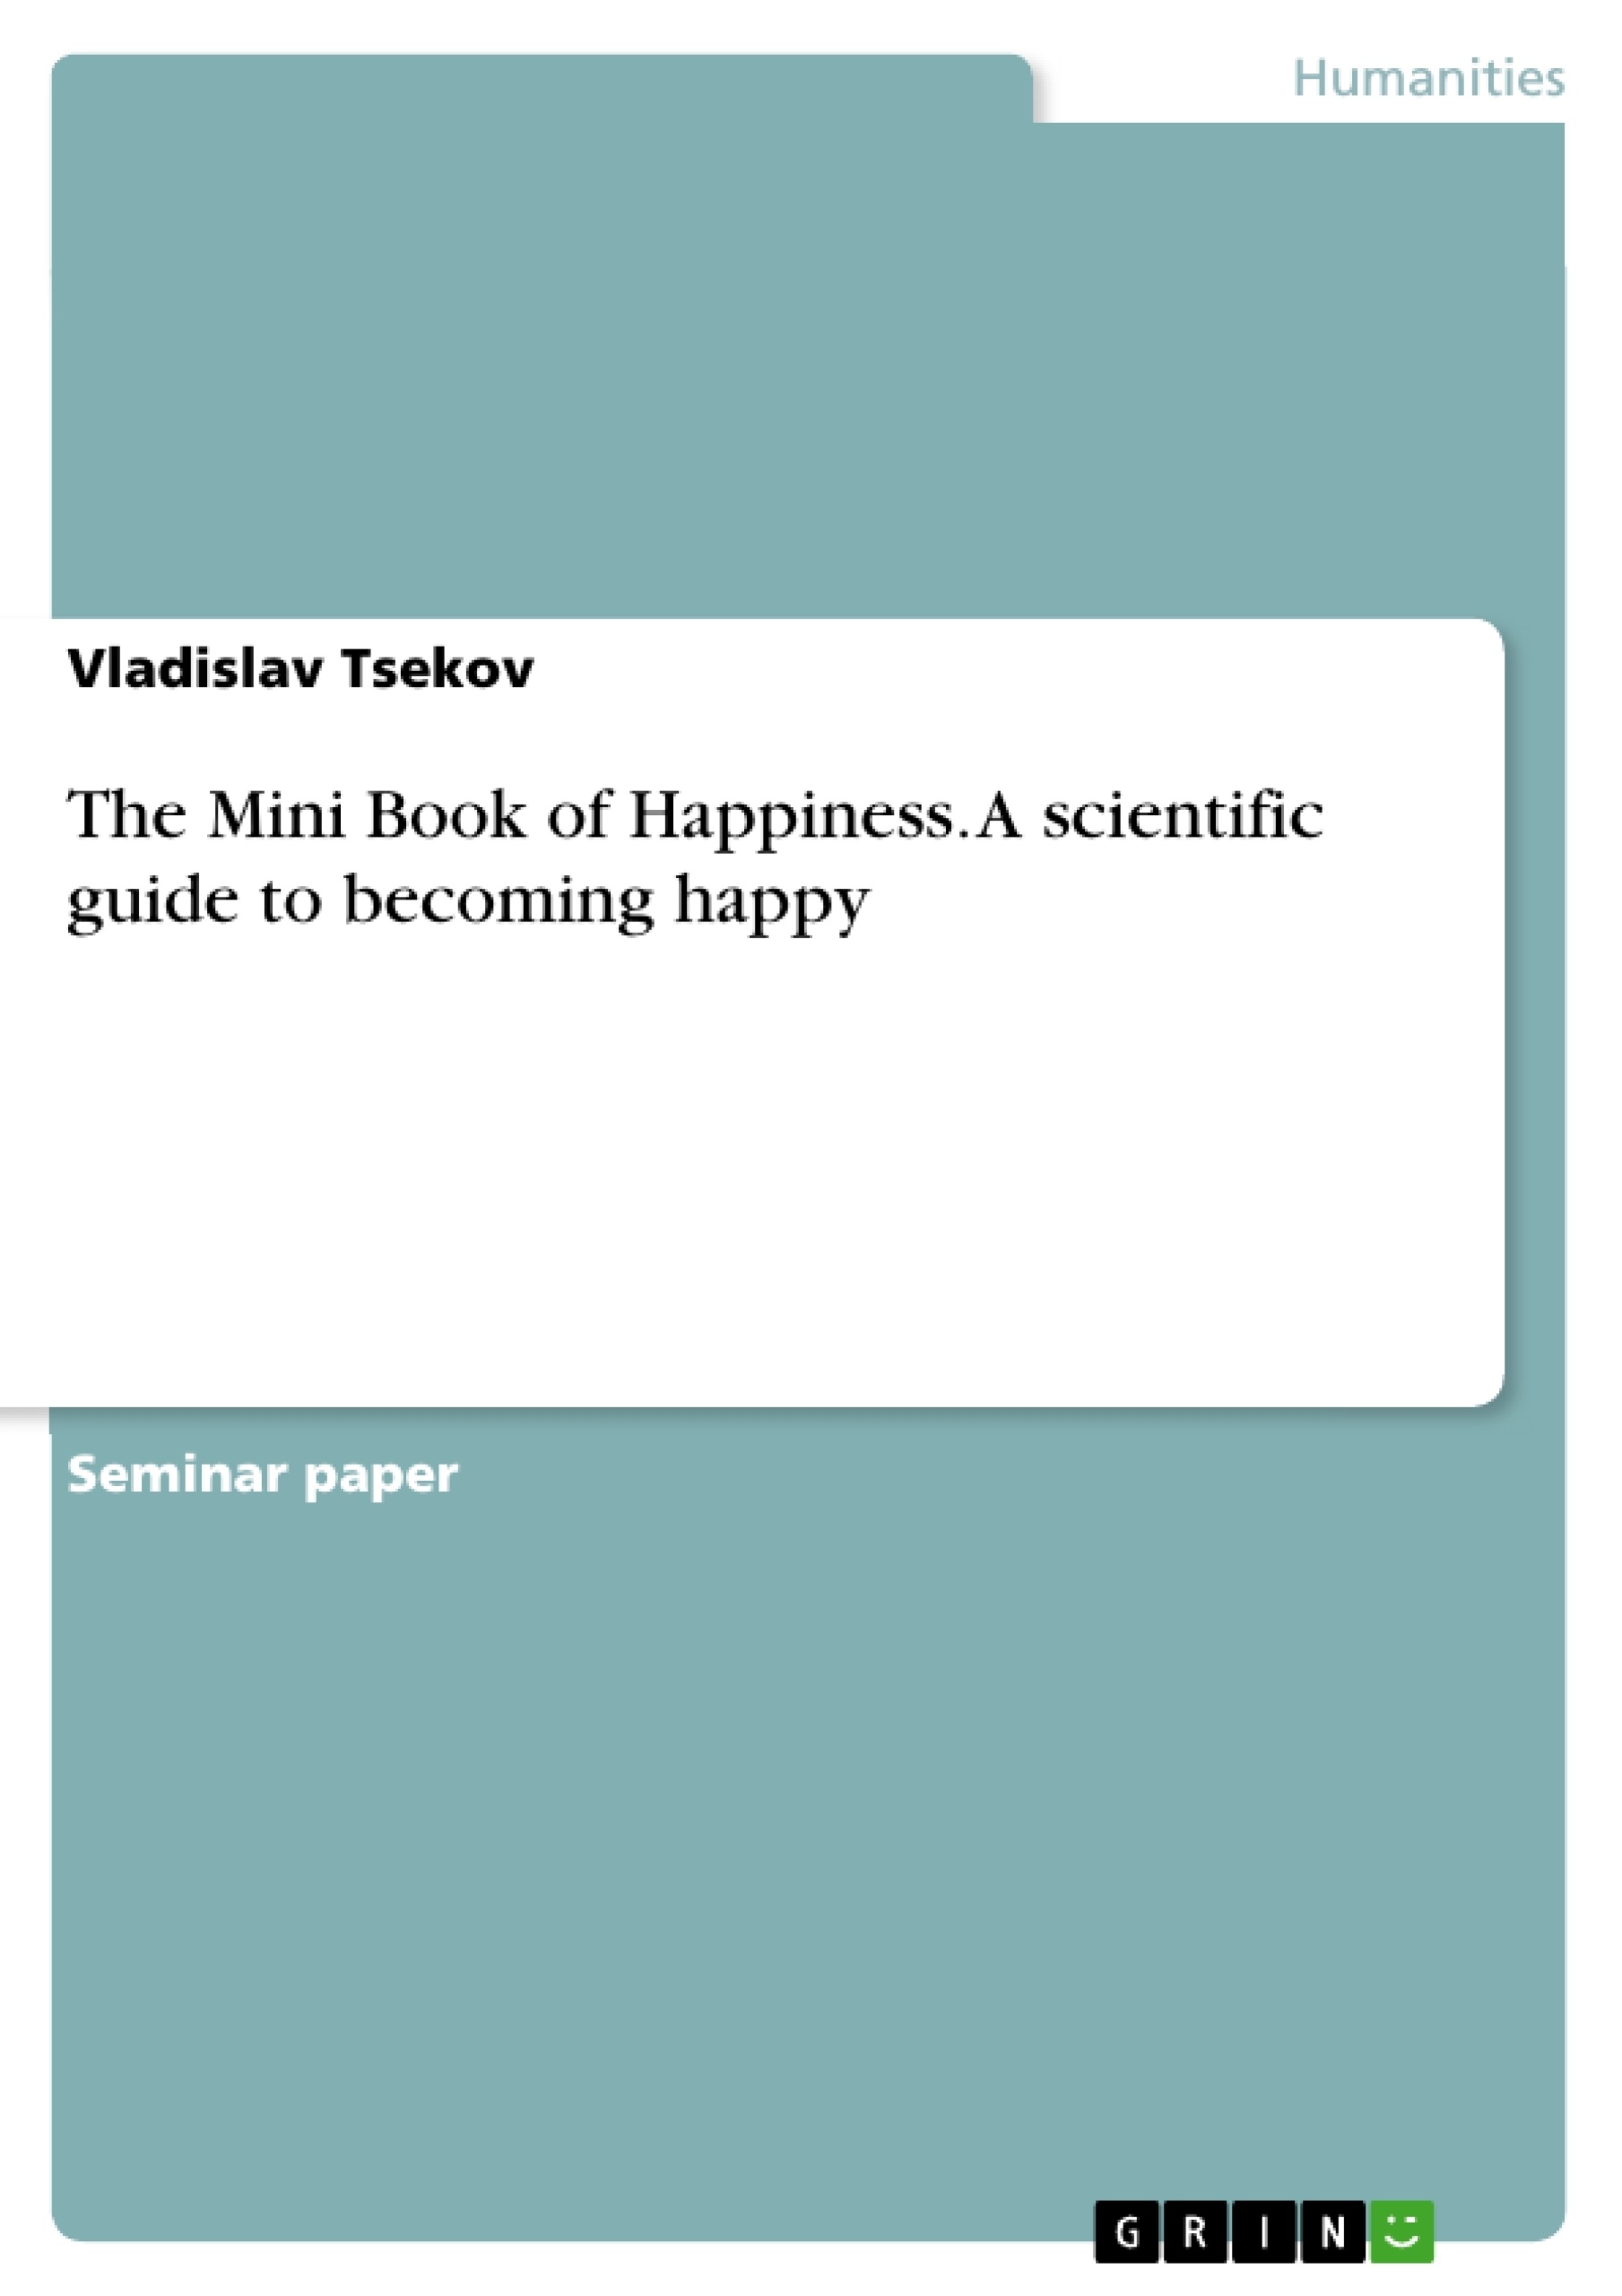 Título: The Mini Book of Happiness. A scientific guide to becoming happy